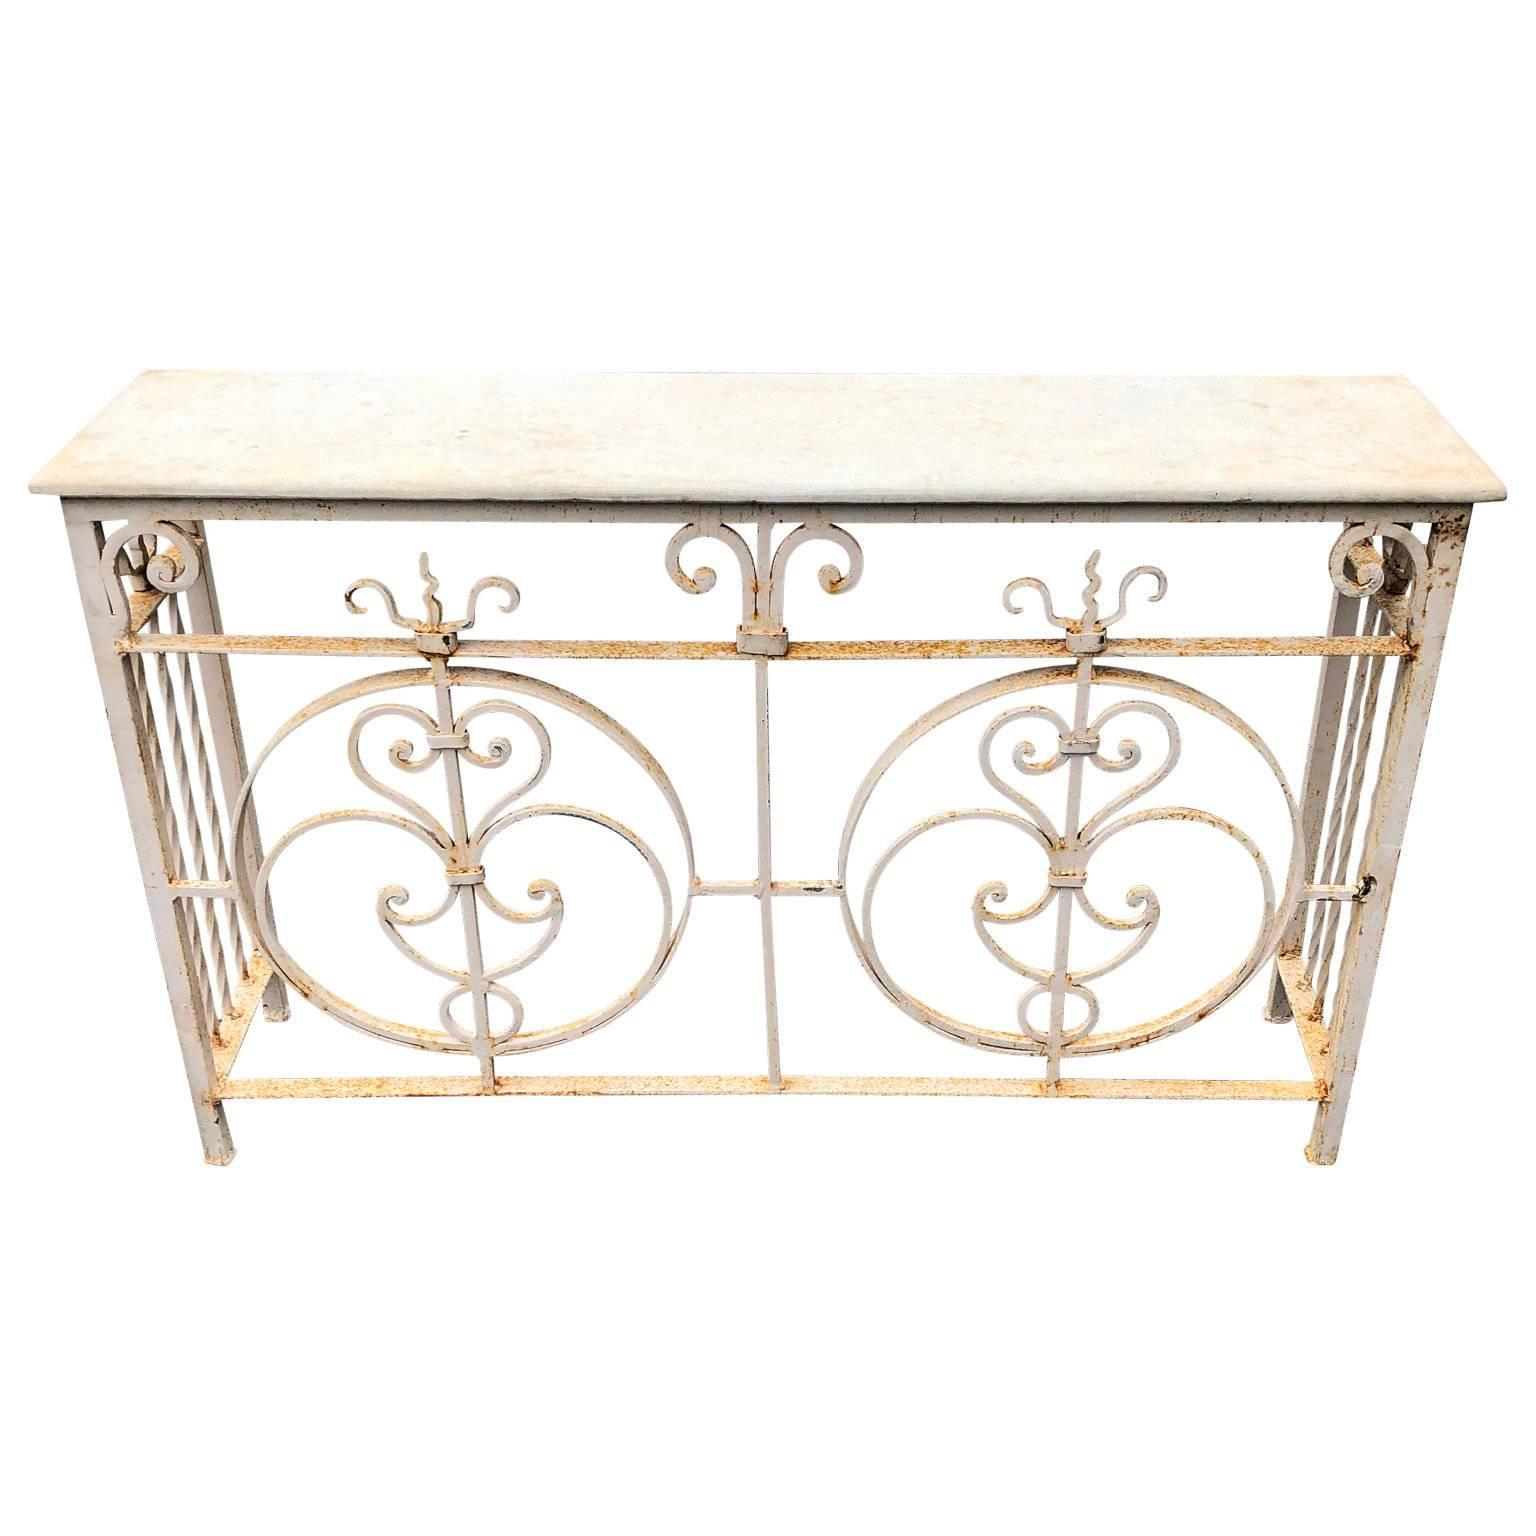 Vintage White Painted Iron Stone Top Garden Console